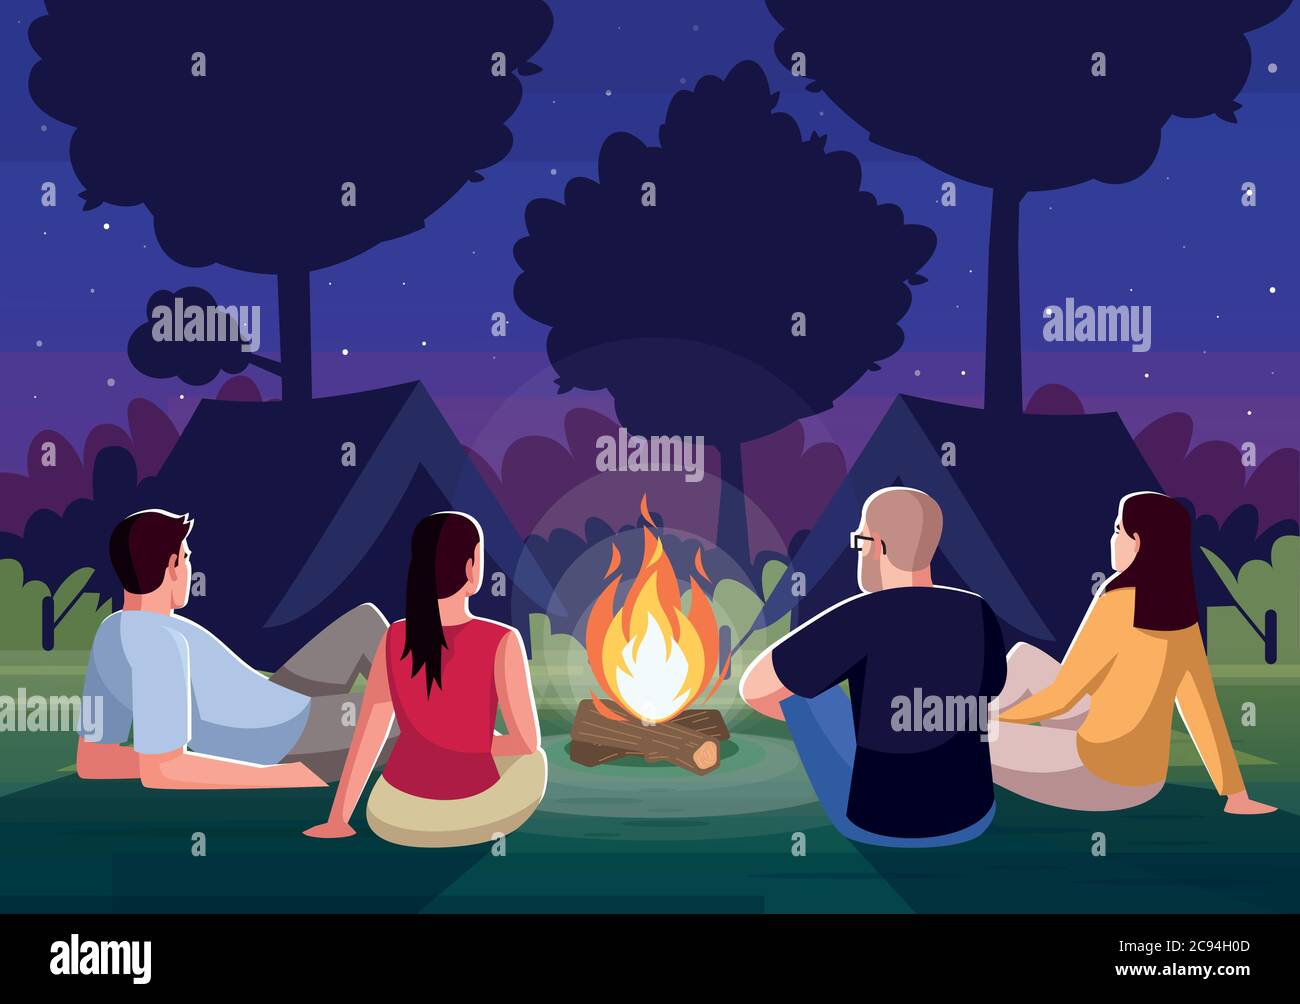 Camping at night semi flat vector illustration. People sit near campfire in evening. Bonfire in forest. Campground for group. Friends on recreation in Stock Vector